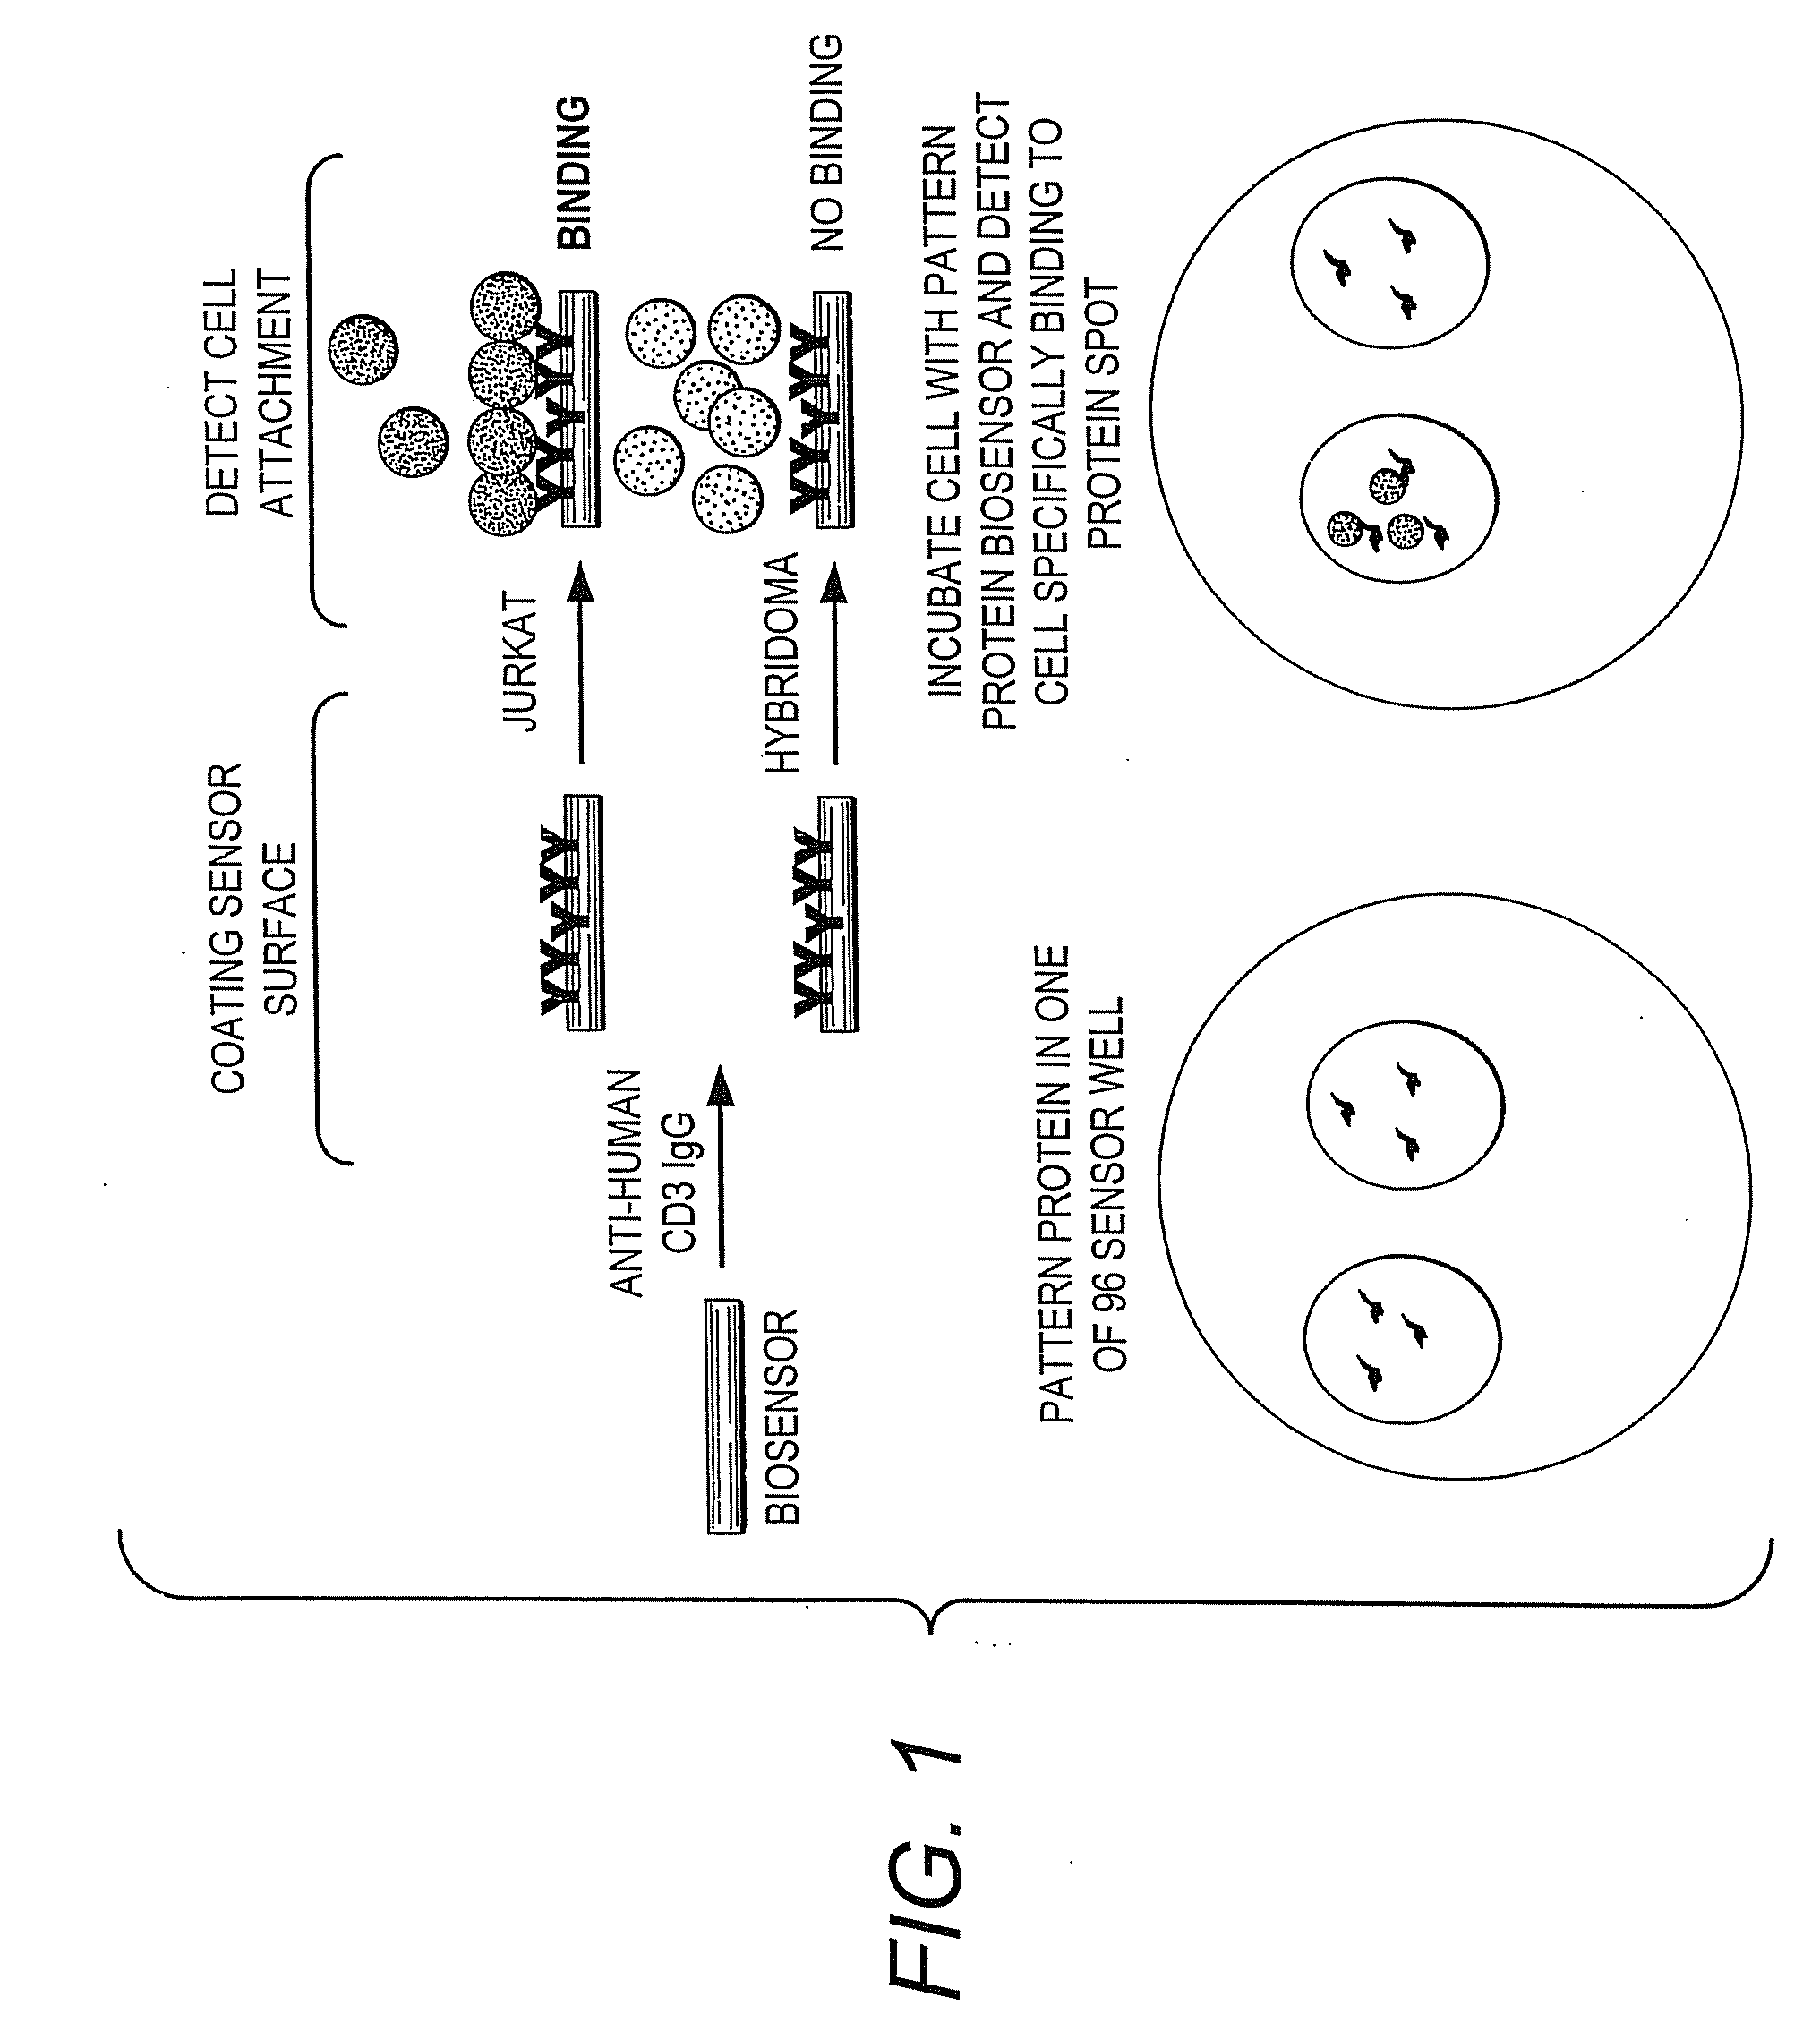 Methods of Detection of Changes in Cells